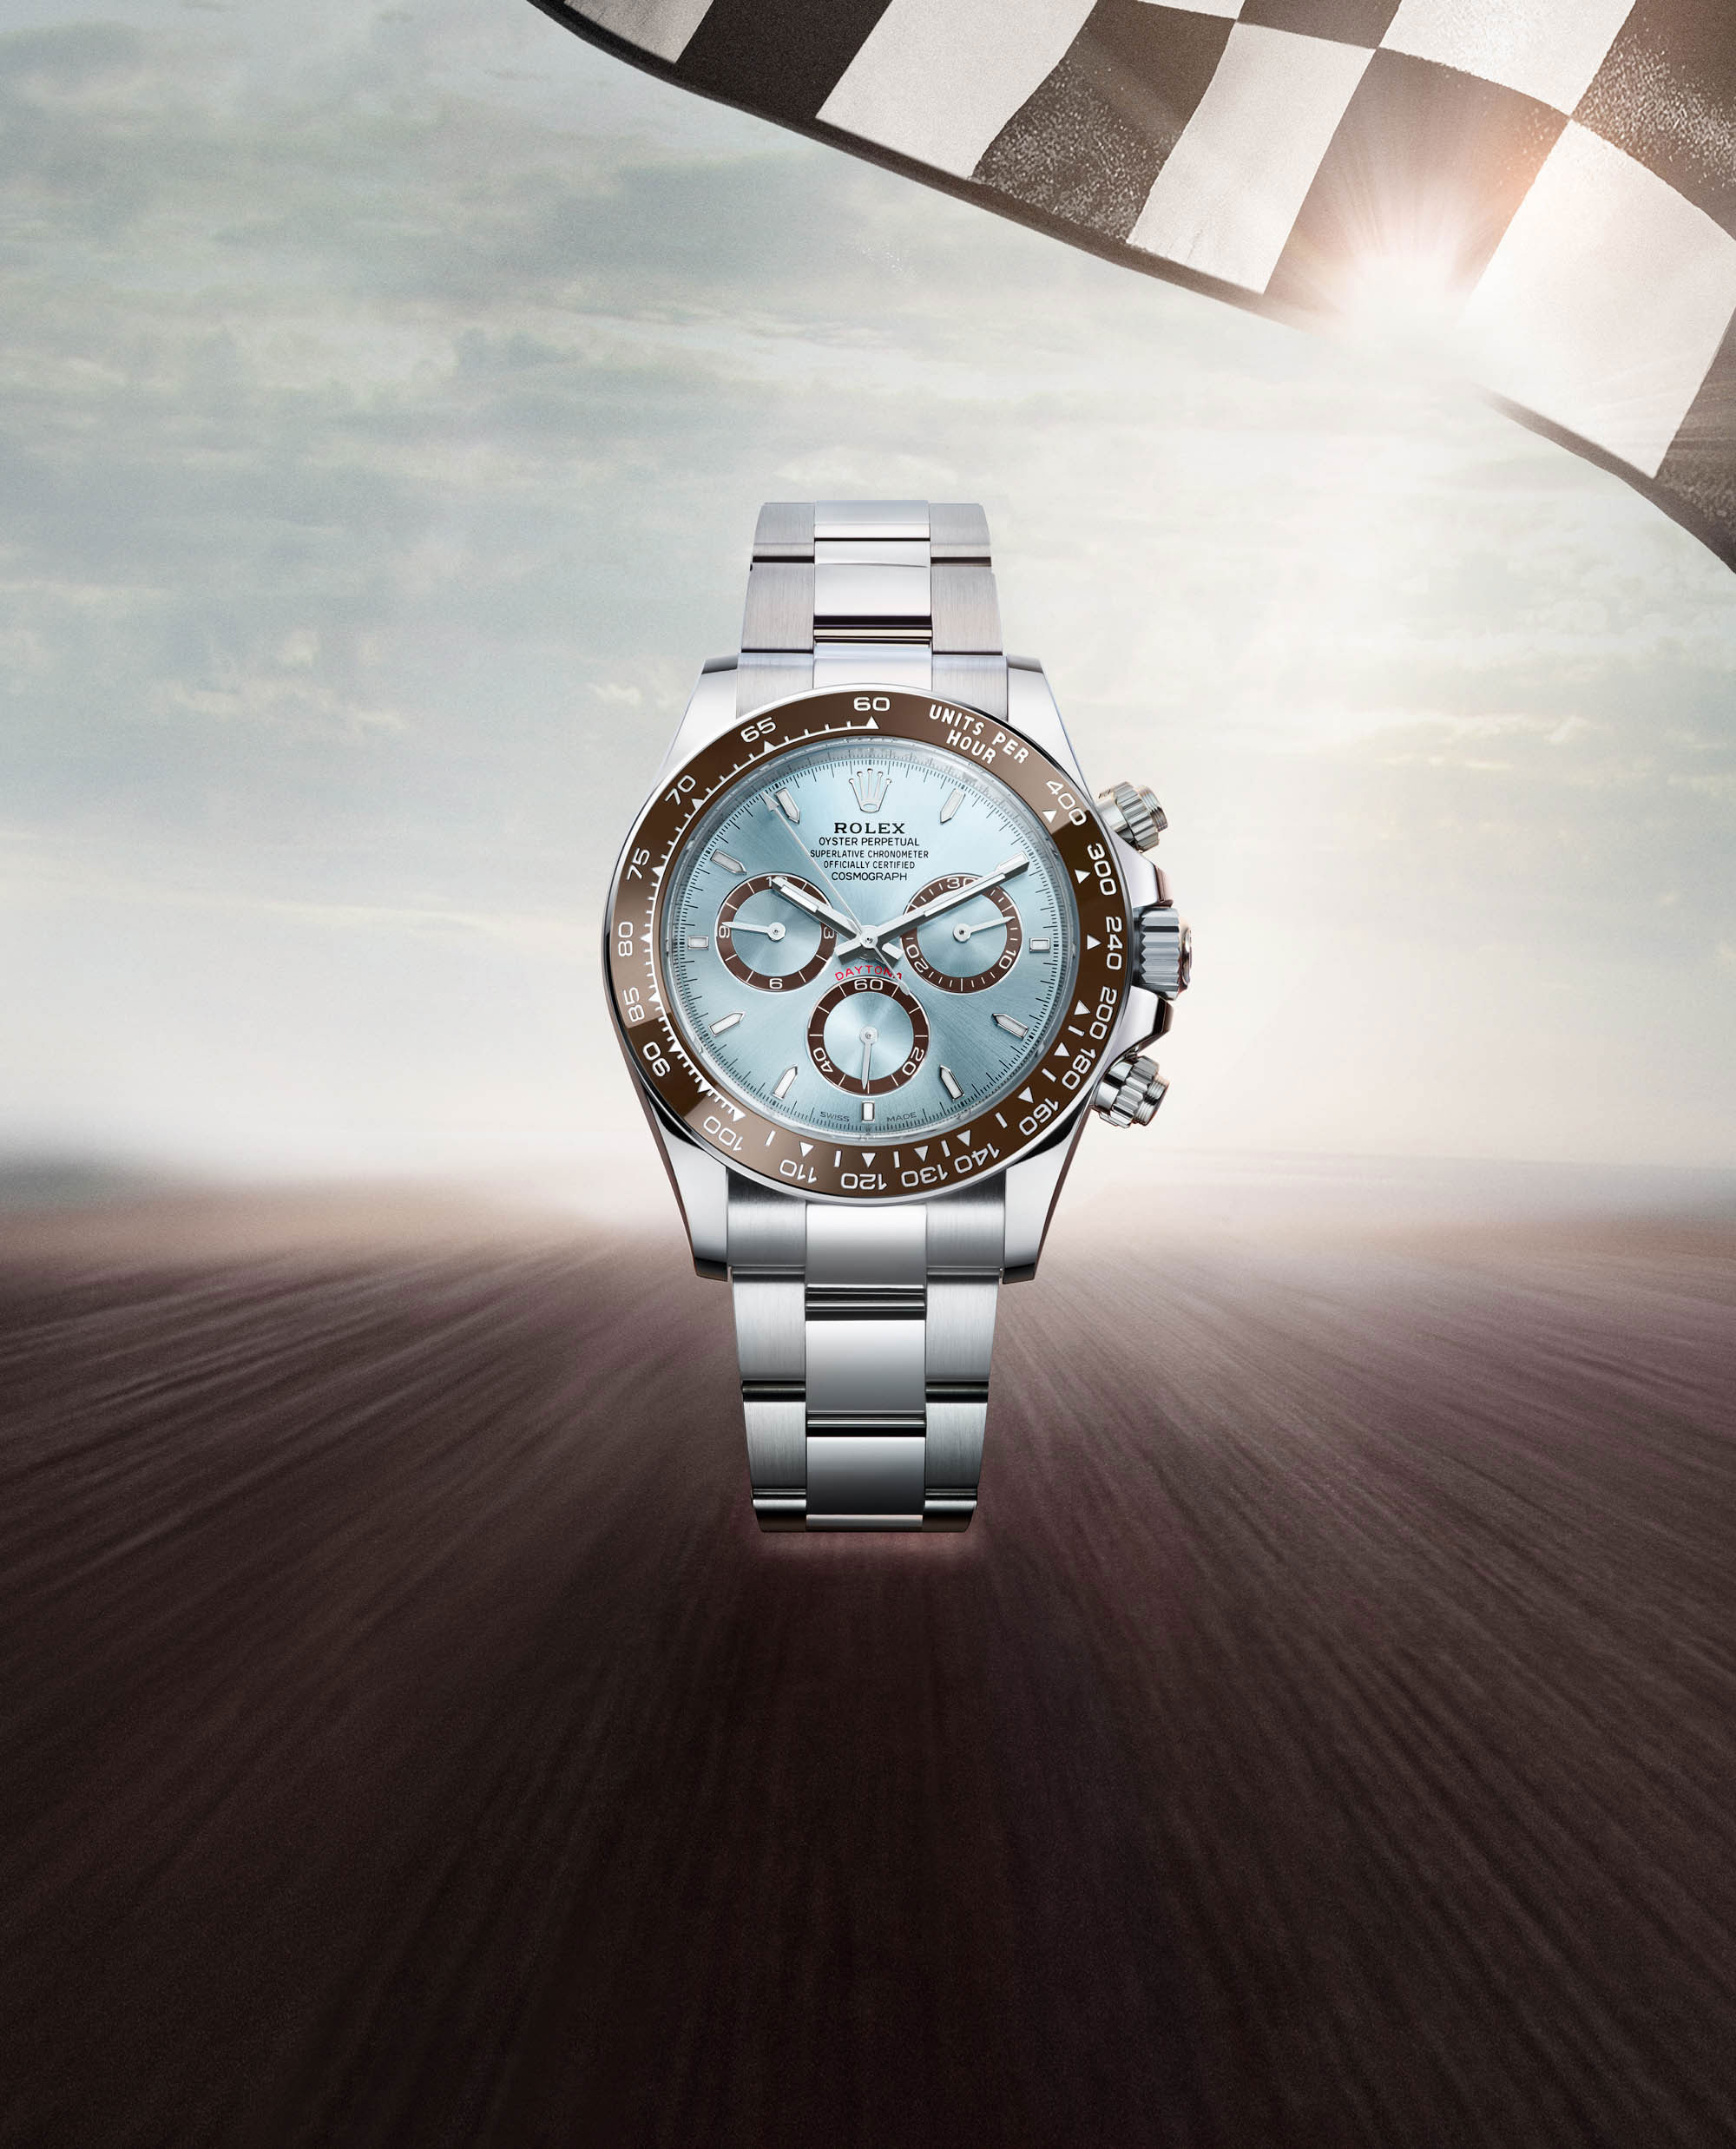 Rolex Cosmograph Daytona new watches at Global Watch Company in Vancouver, Canada